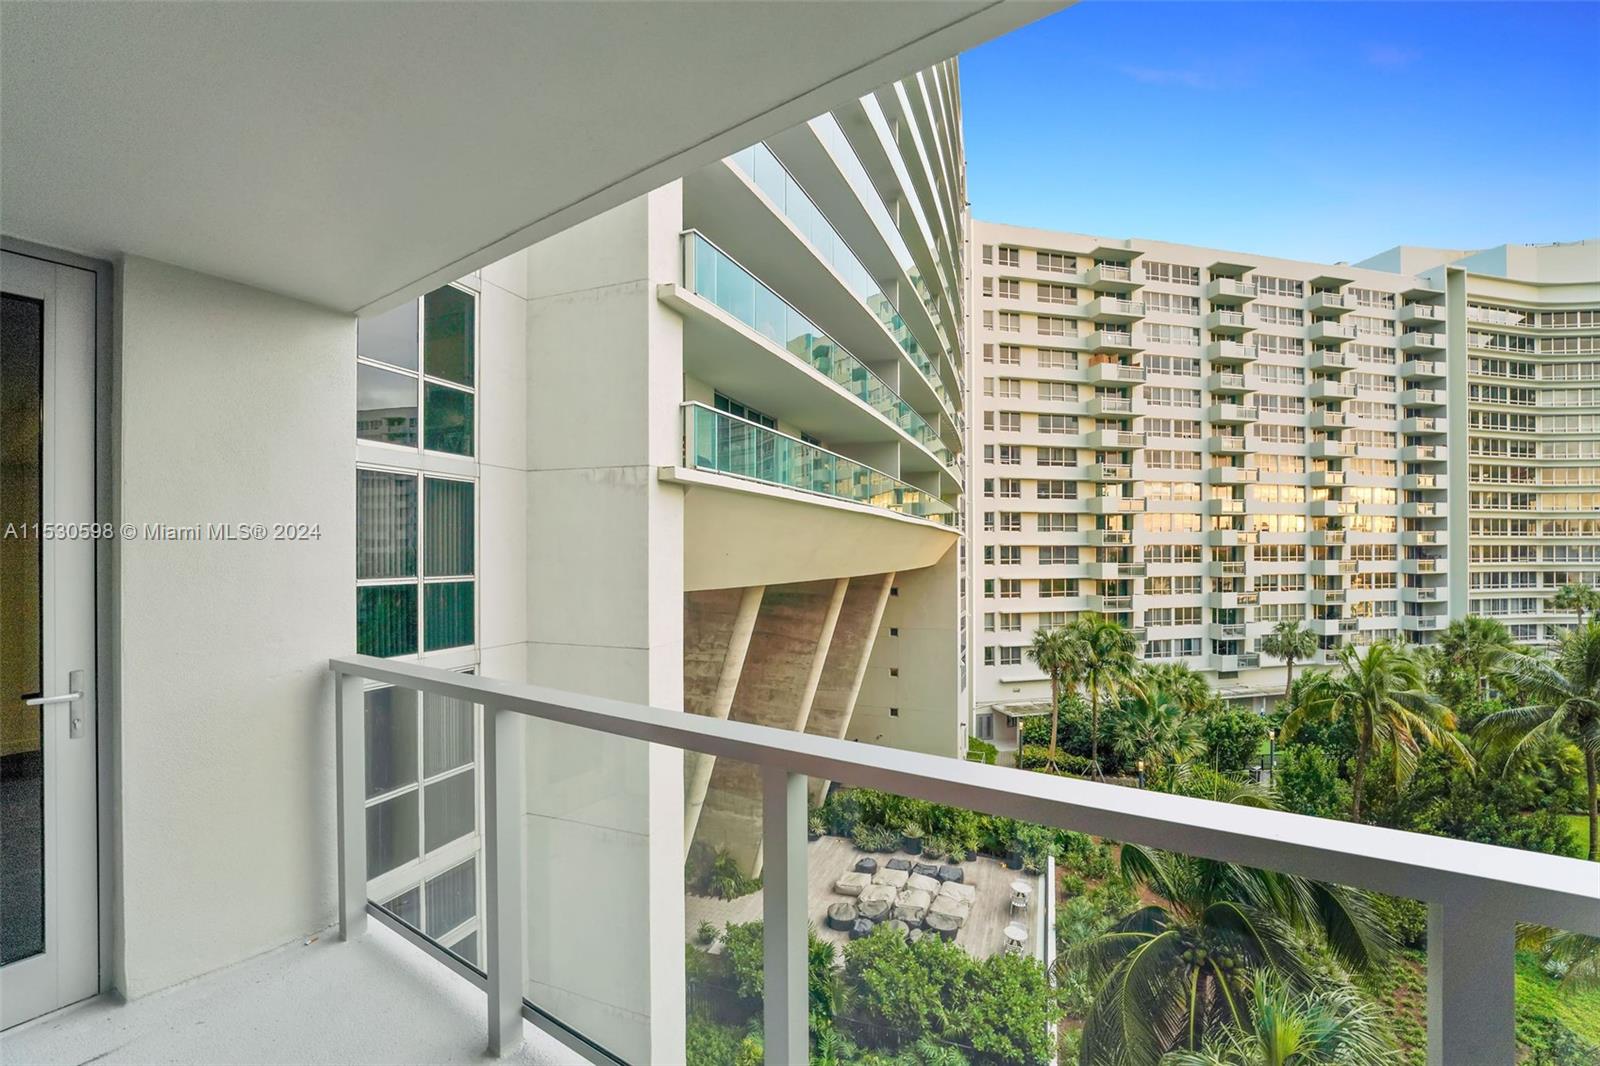 AVAILABLE 03/04. Photos may be from the exact unit on the same line but on another floor. Welcome to Flamingo Point Miami Beach's most exciting rental community. This unit features hardwood floors, modern kitchen & baths w/SS appliances & granite counter tops. Amenities include fitness center, two resort style pools with private cabanas, BBQ area and much more. Move in costs are 1st month + $1500 deposit. Parking cost 1st vchl. $187 p/m. Pet Fee: $400+$50/month. *FAST APPROVAL! (NOTE: Rental rates are subject to change depending on move-in date and lease term. Advertised rate is best rate and maybe on leases longer than 12 months. Income must be greater than 3x one month's rent and minimum credit score of 620 in order to be approved).